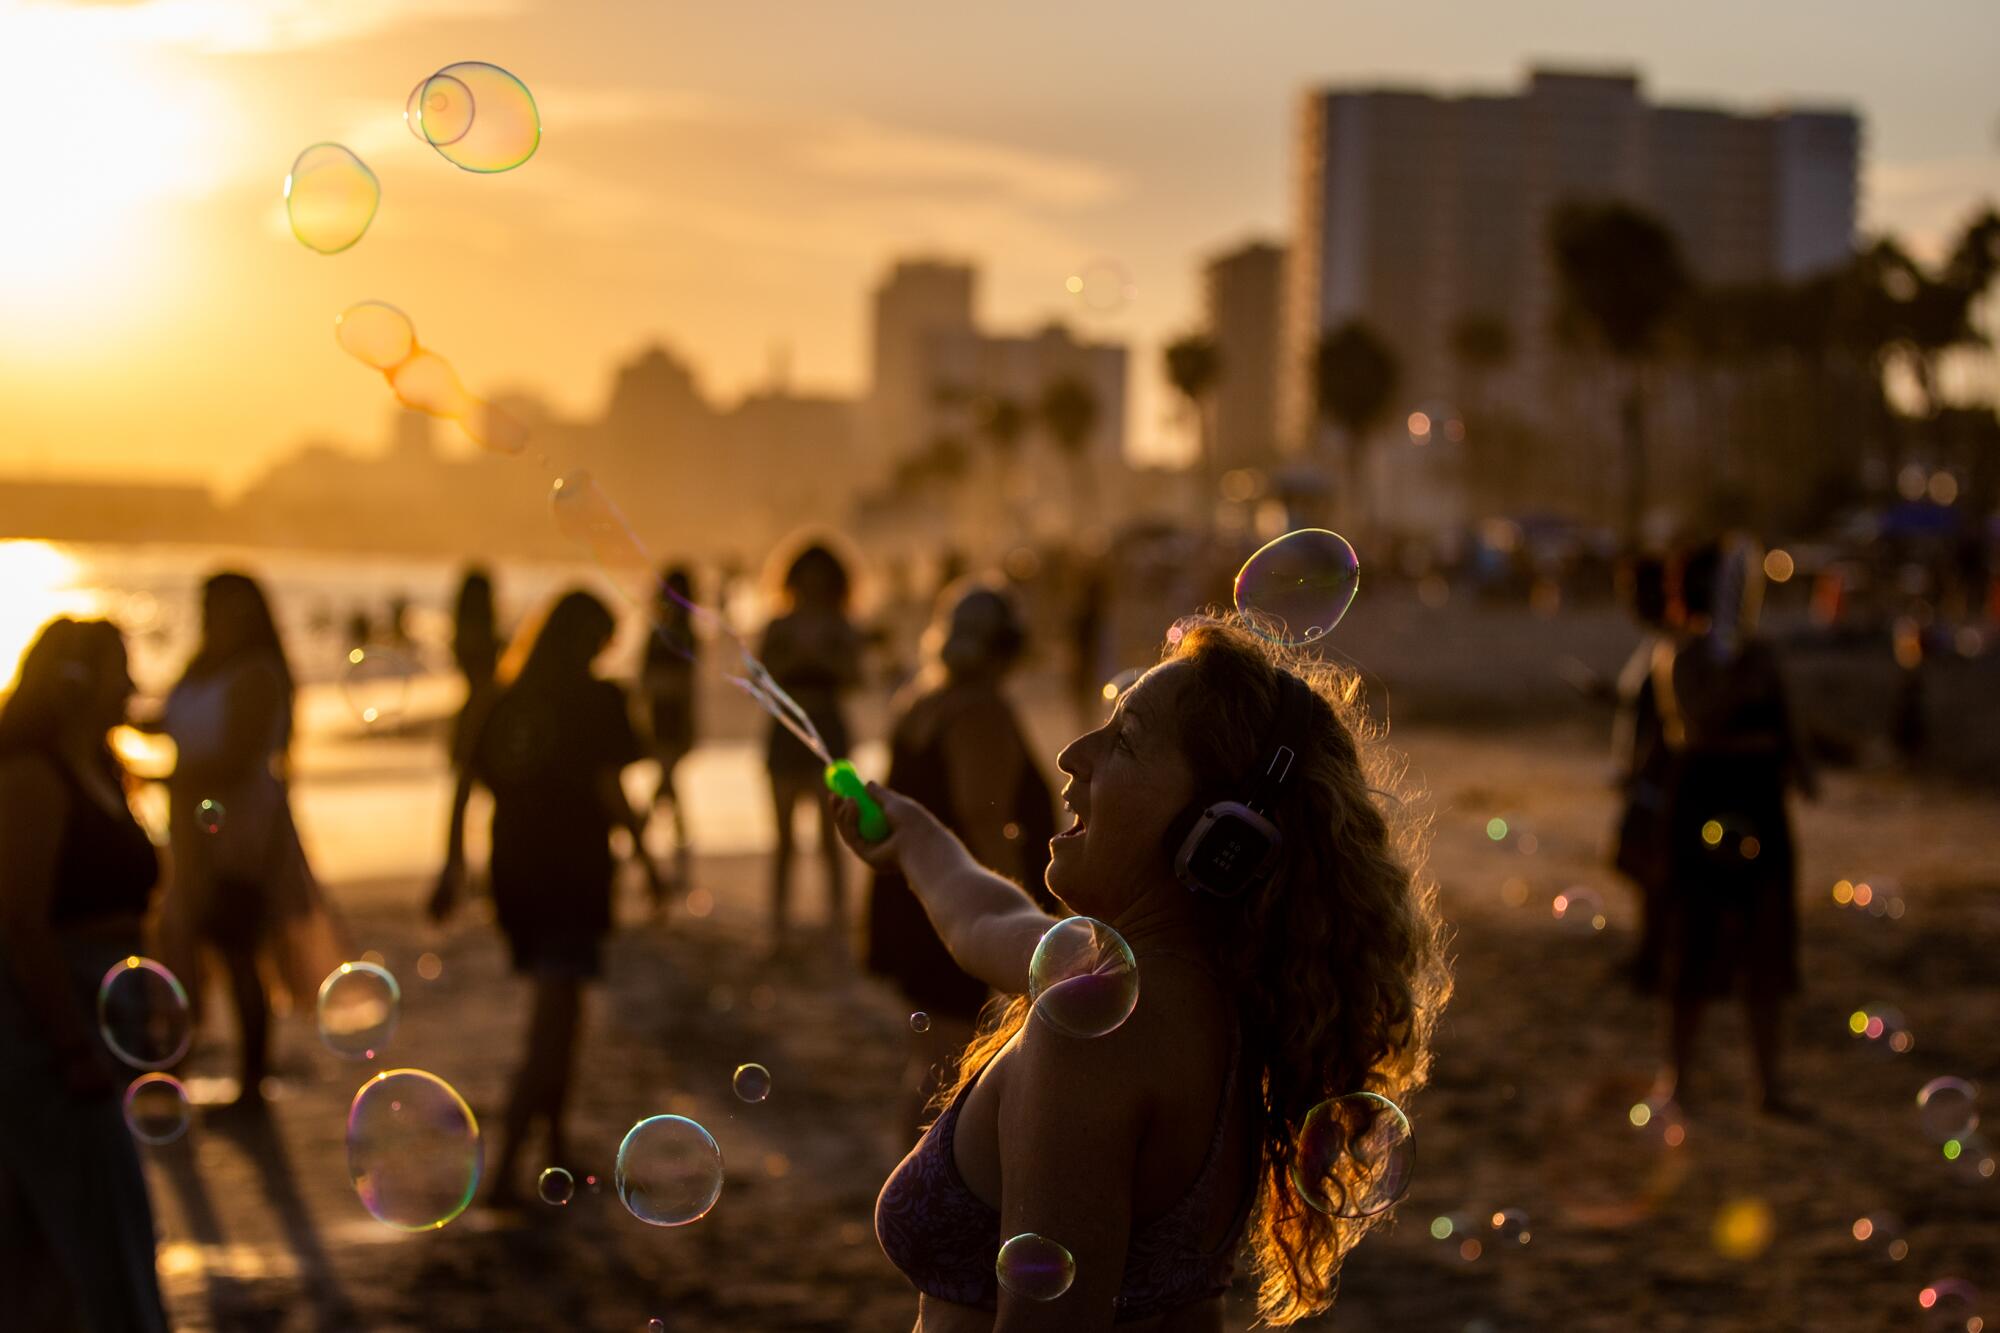 A sunset image of a woman wearing headphones, dancing on the beach and creating bubbles with a bubble wand.